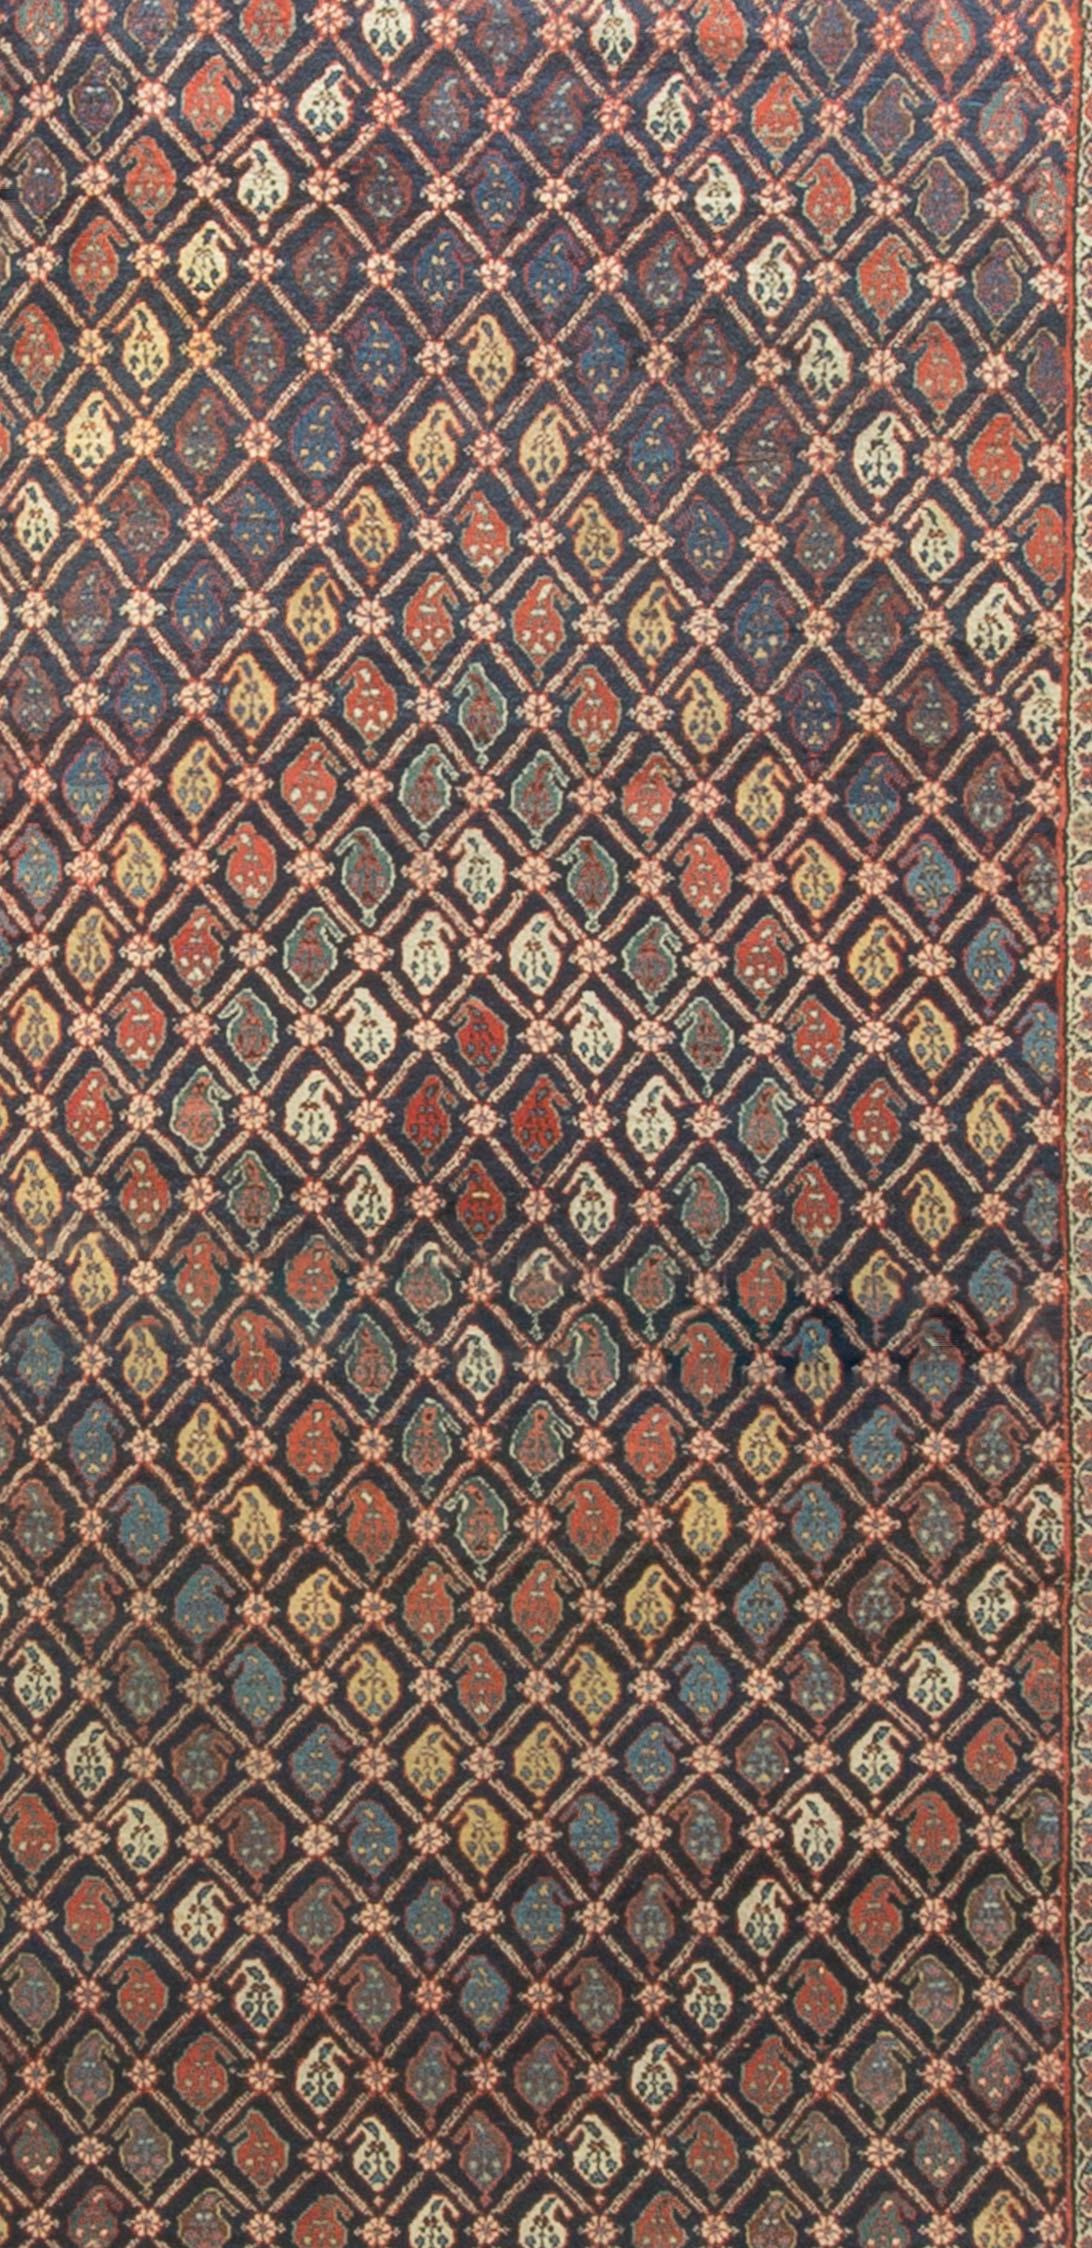 A wonderful design so expertly carried out in the weaving to create this overall diamond look. A hand woven Kurdish antique, circa 1900 handwoven rug.